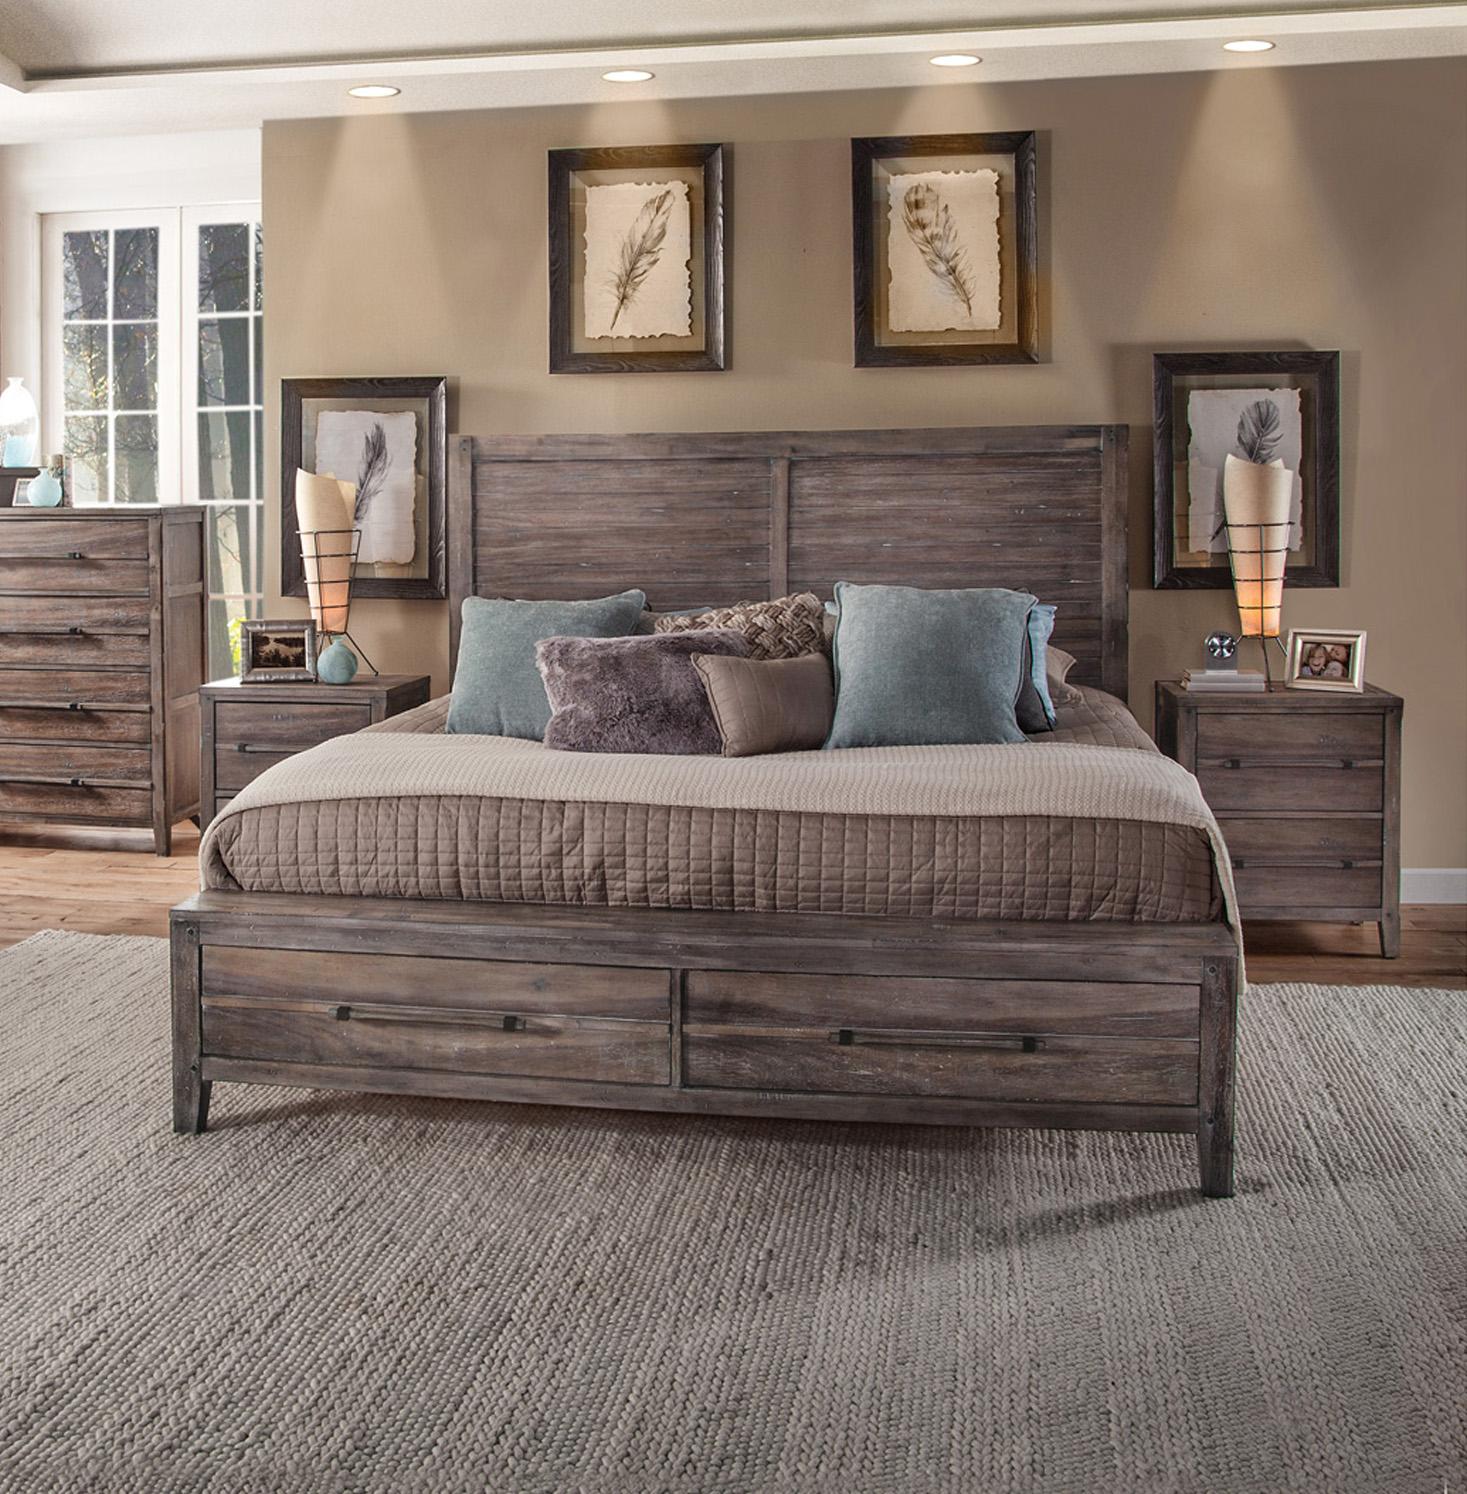 Classic, Traditional Panel Bed AURORA 2800-66PNST 2800-66PNST in Driftwood, Gray 